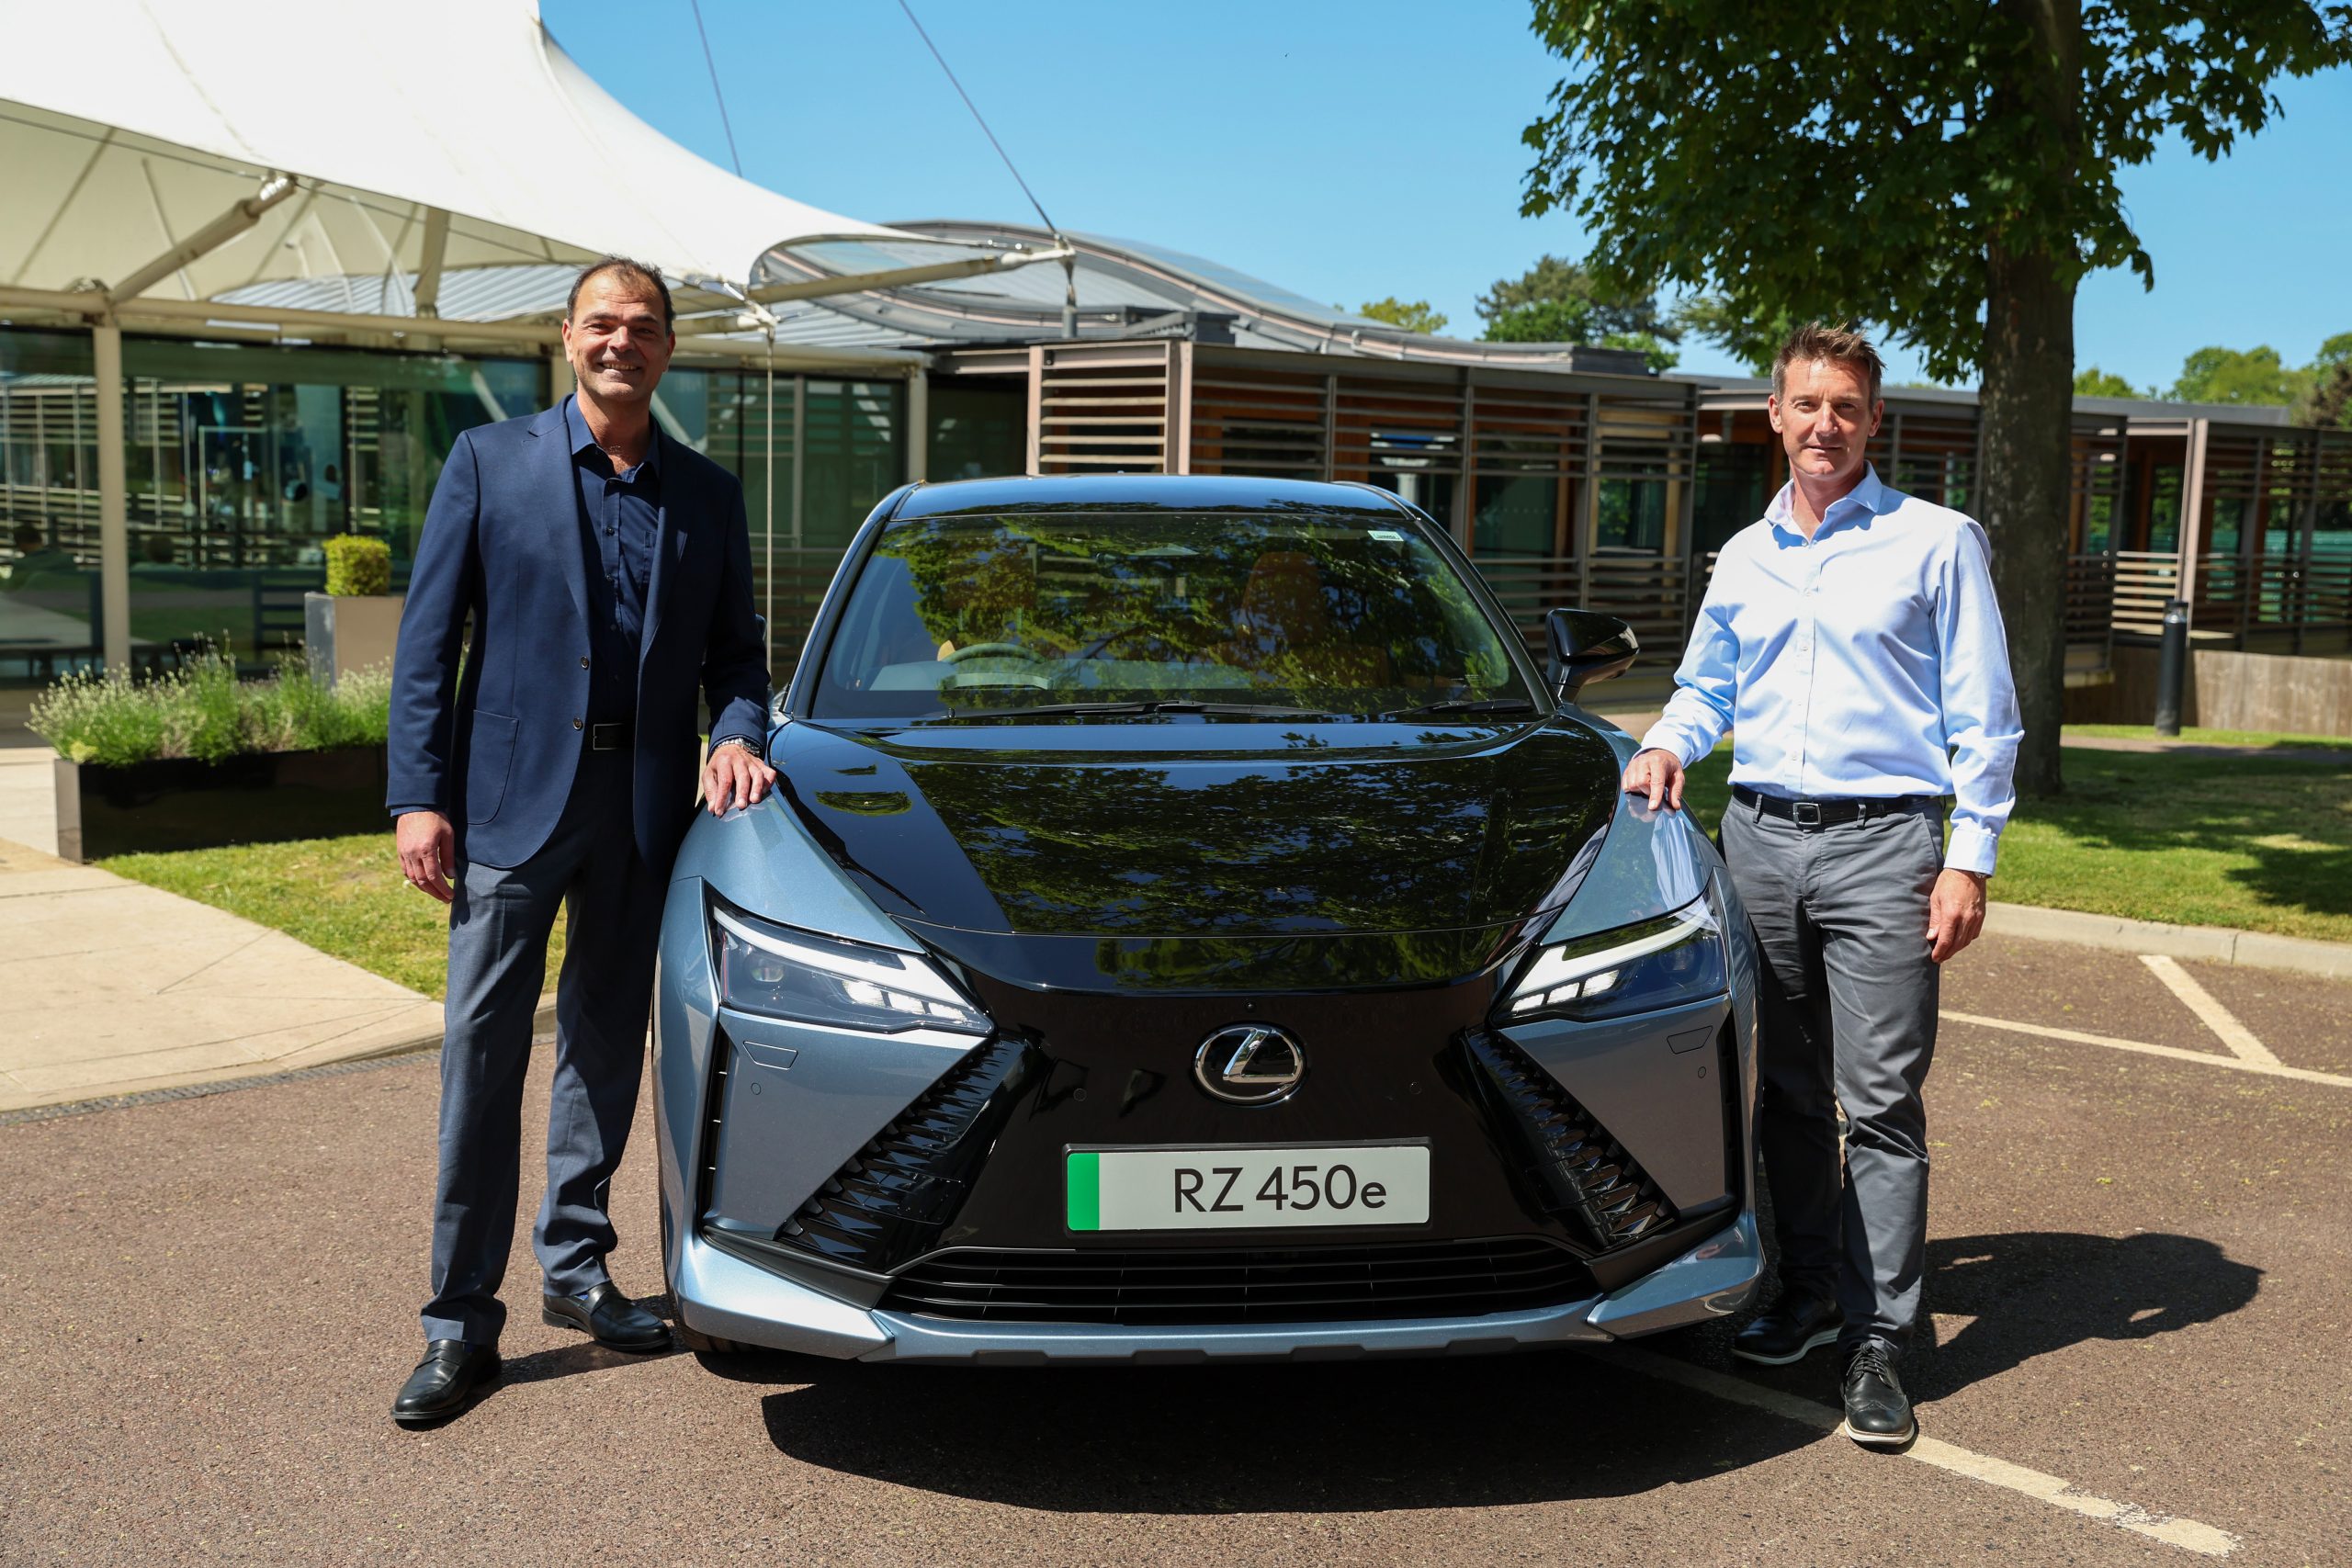 The Lawn Tennis Association and Lexus announce new partnership